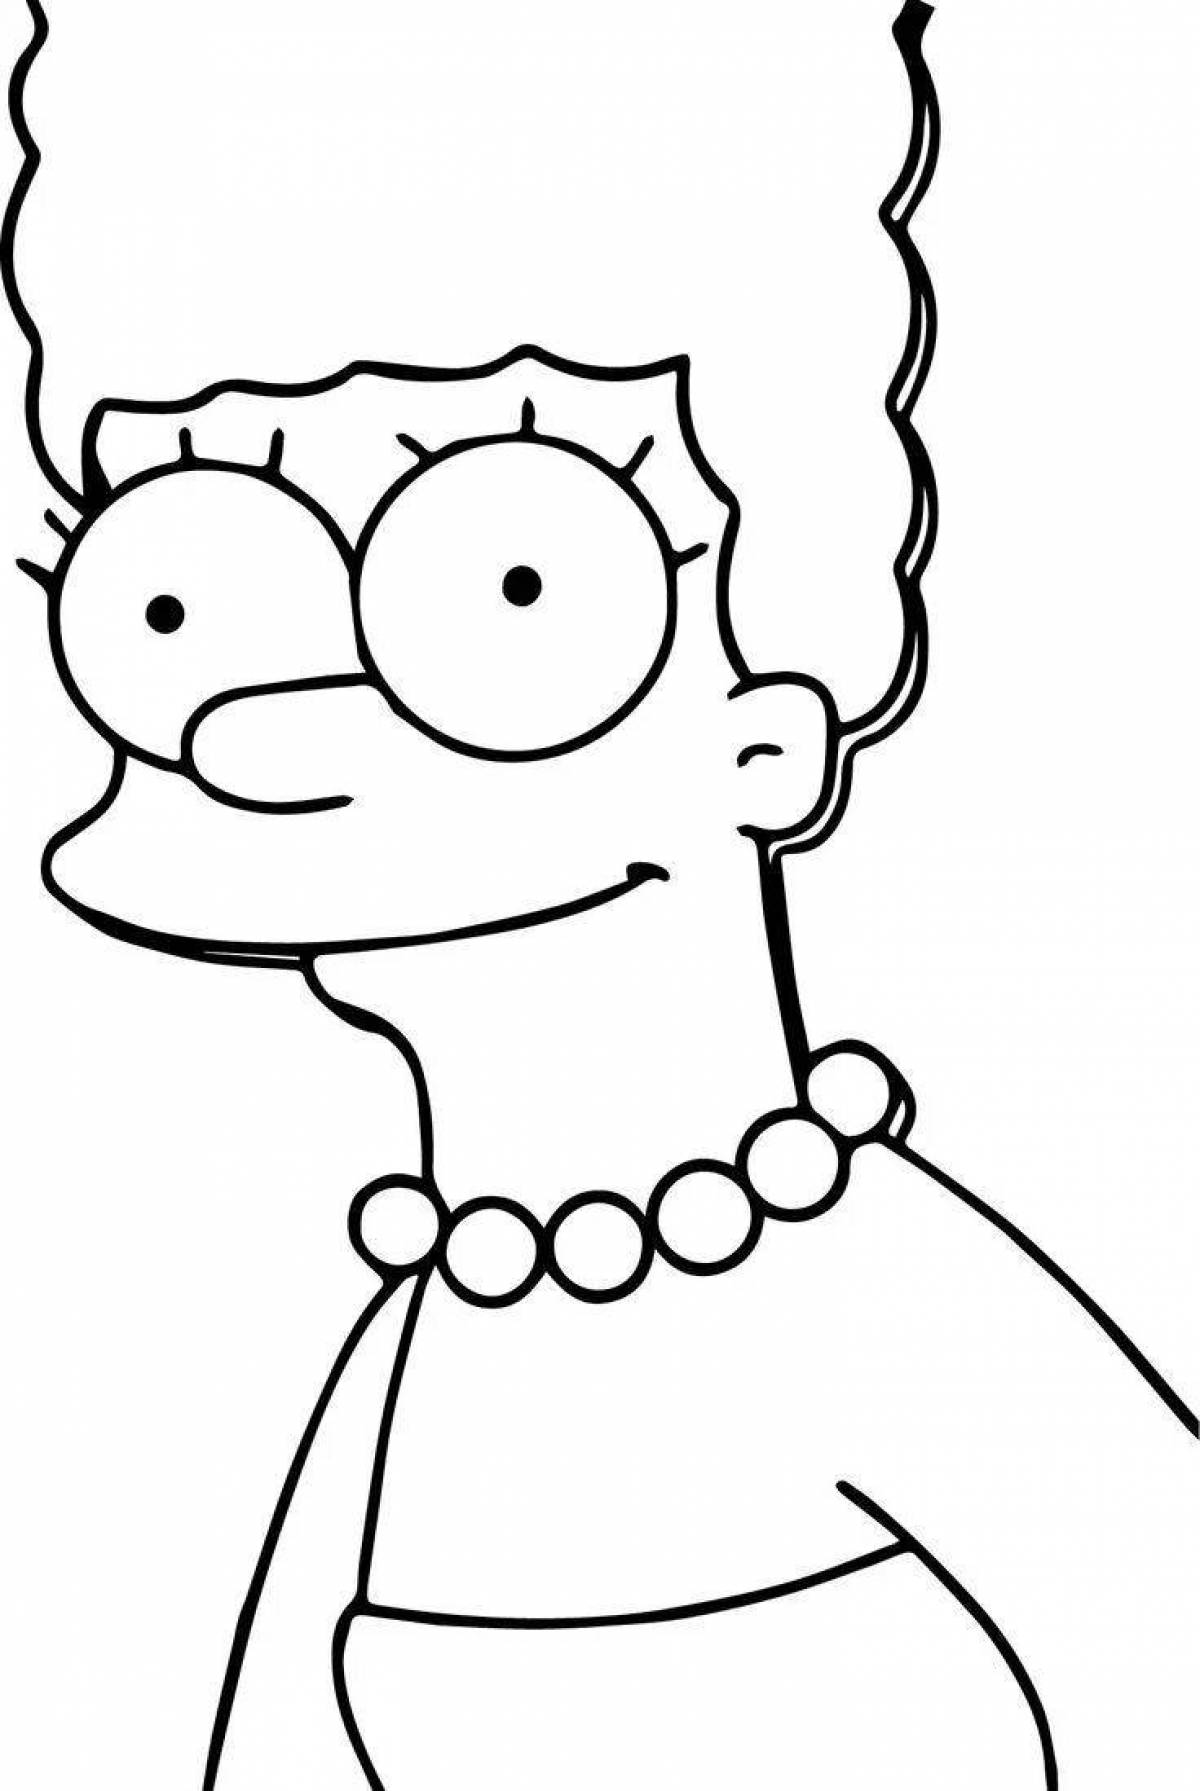 Marge simpson gorgeous coloring book